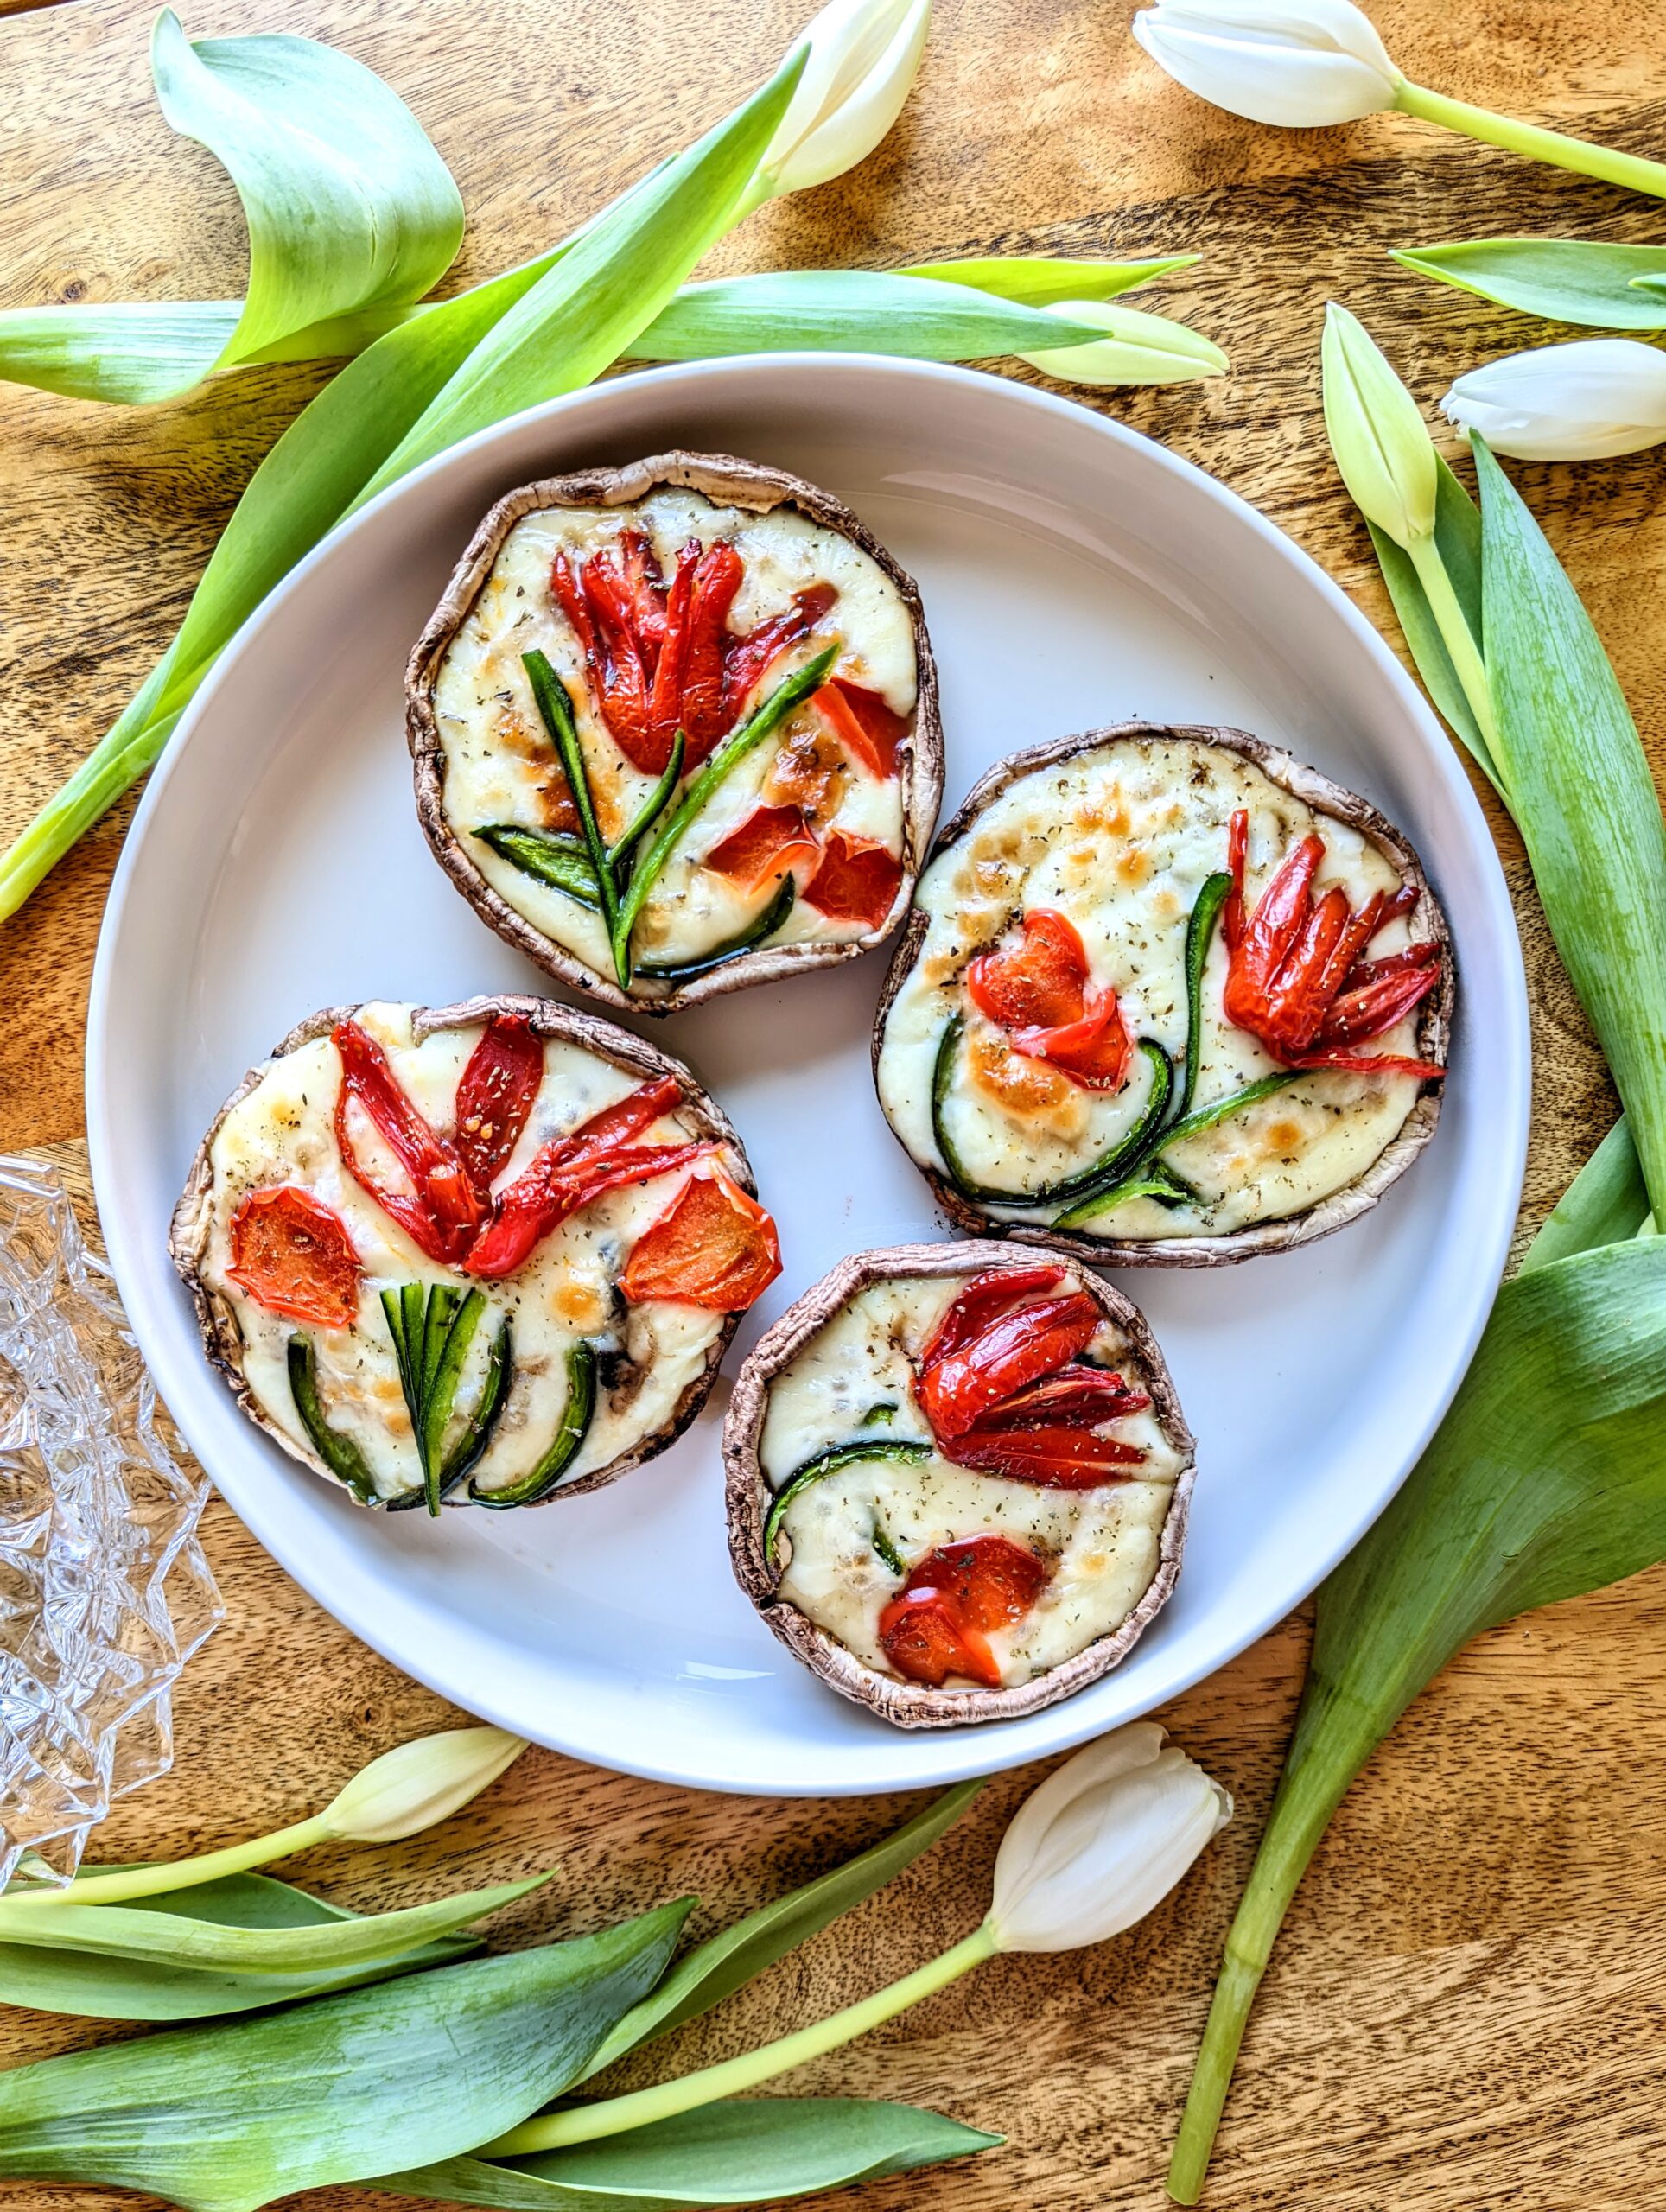 Four portobello mushrooms stuffed with mozzarella cheese, tomato, and bell pepper. The tomato and bell peppers are cut into shaped to look like tulips. Loose white tulips surround the large plate.